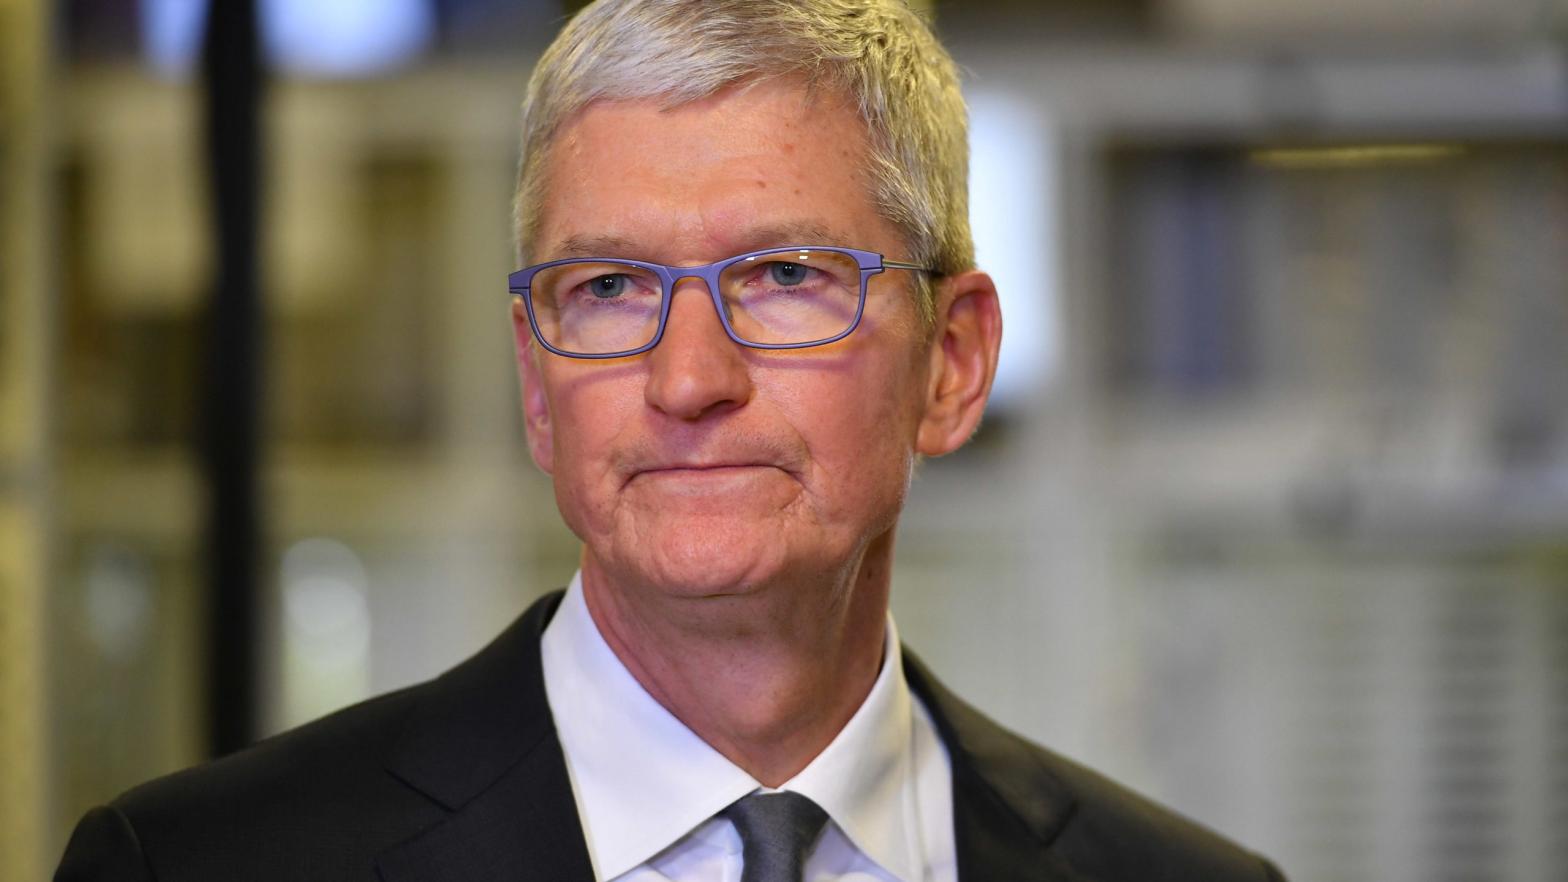 Apple CEO Tim Cook makes his settlement face. (Photo: Mandel Ngan, Getty Images)